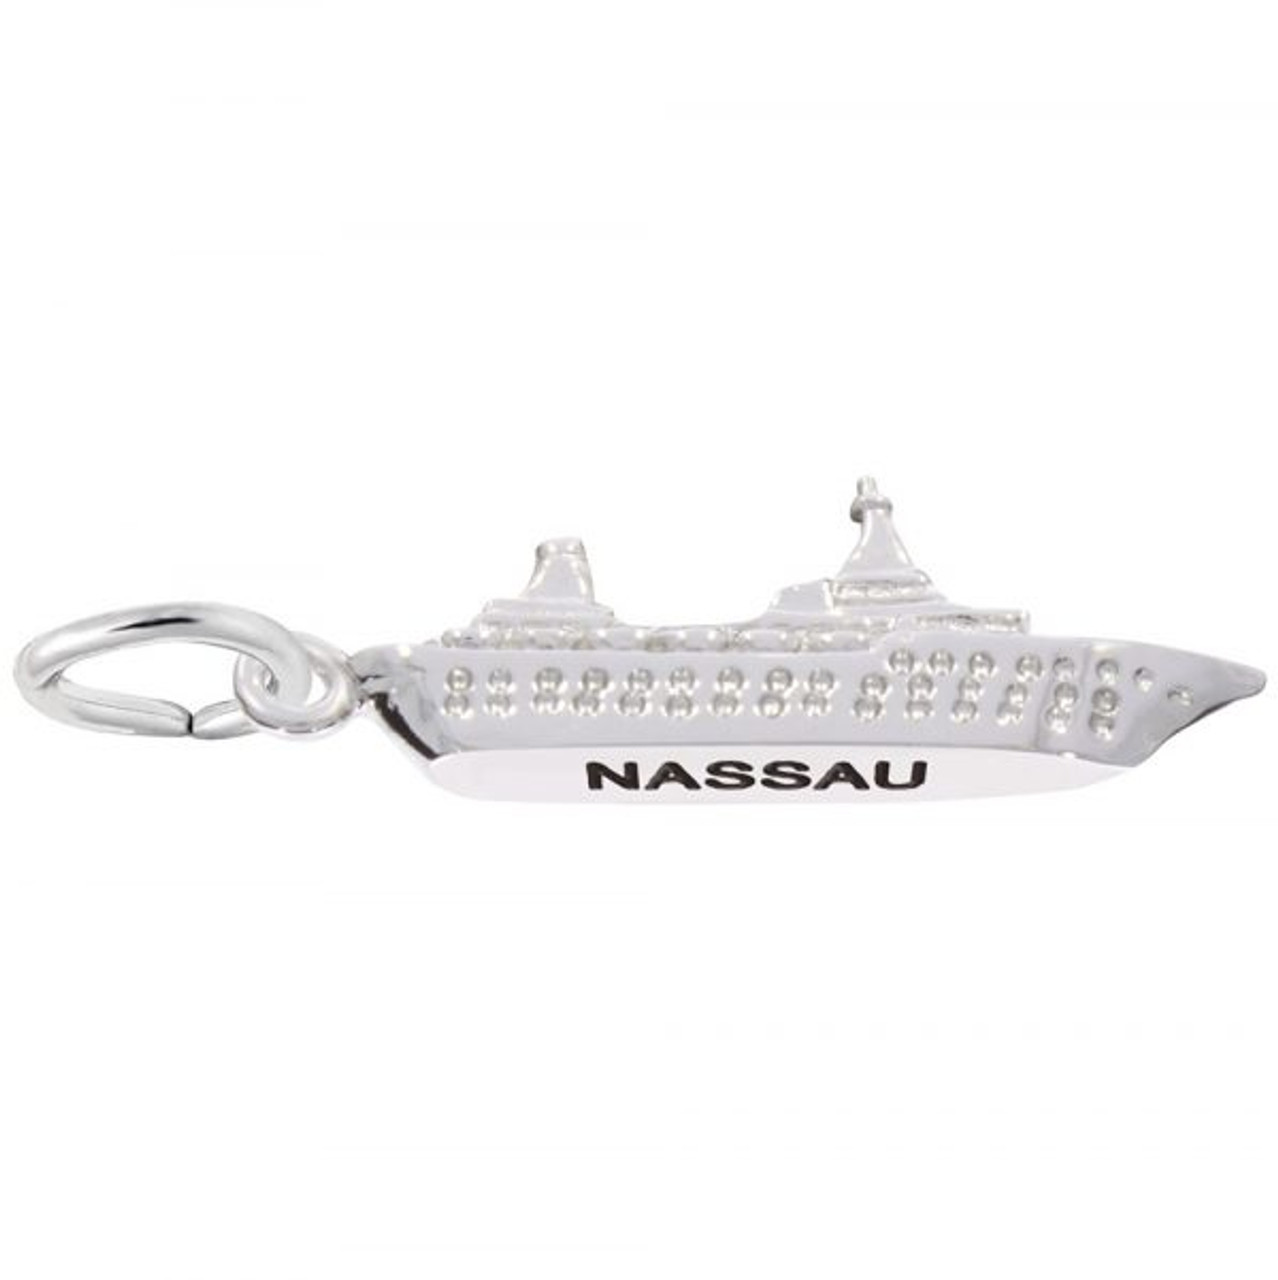 Nassau Cruise Ship 3D Silver Charm - Sterling Silver and 14k White Gold